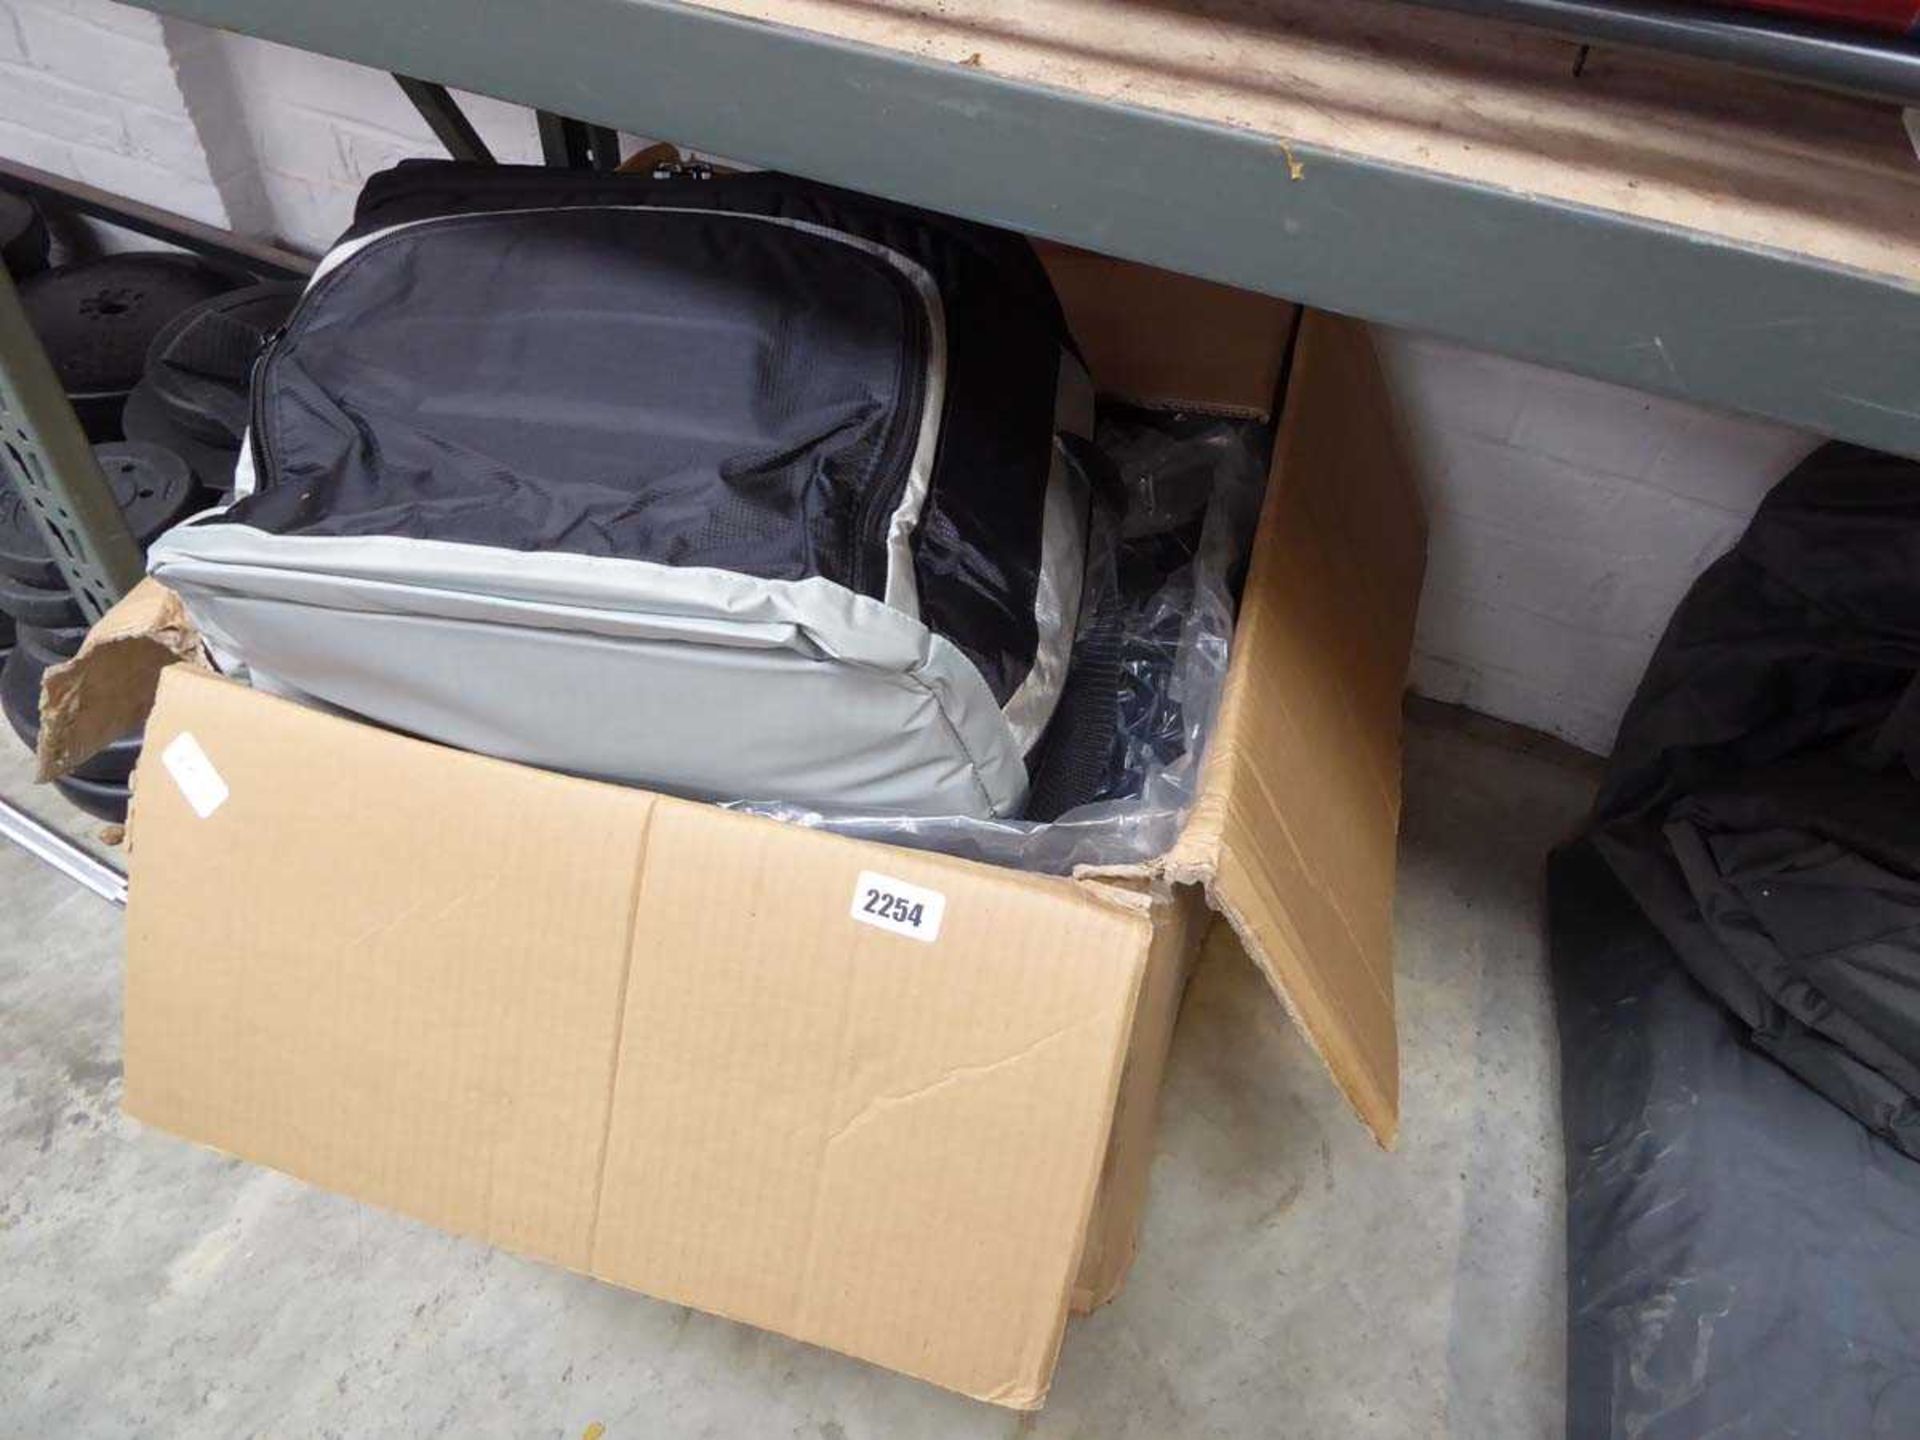 Box containing approximately 24 black and silver thermo insulated cool bags